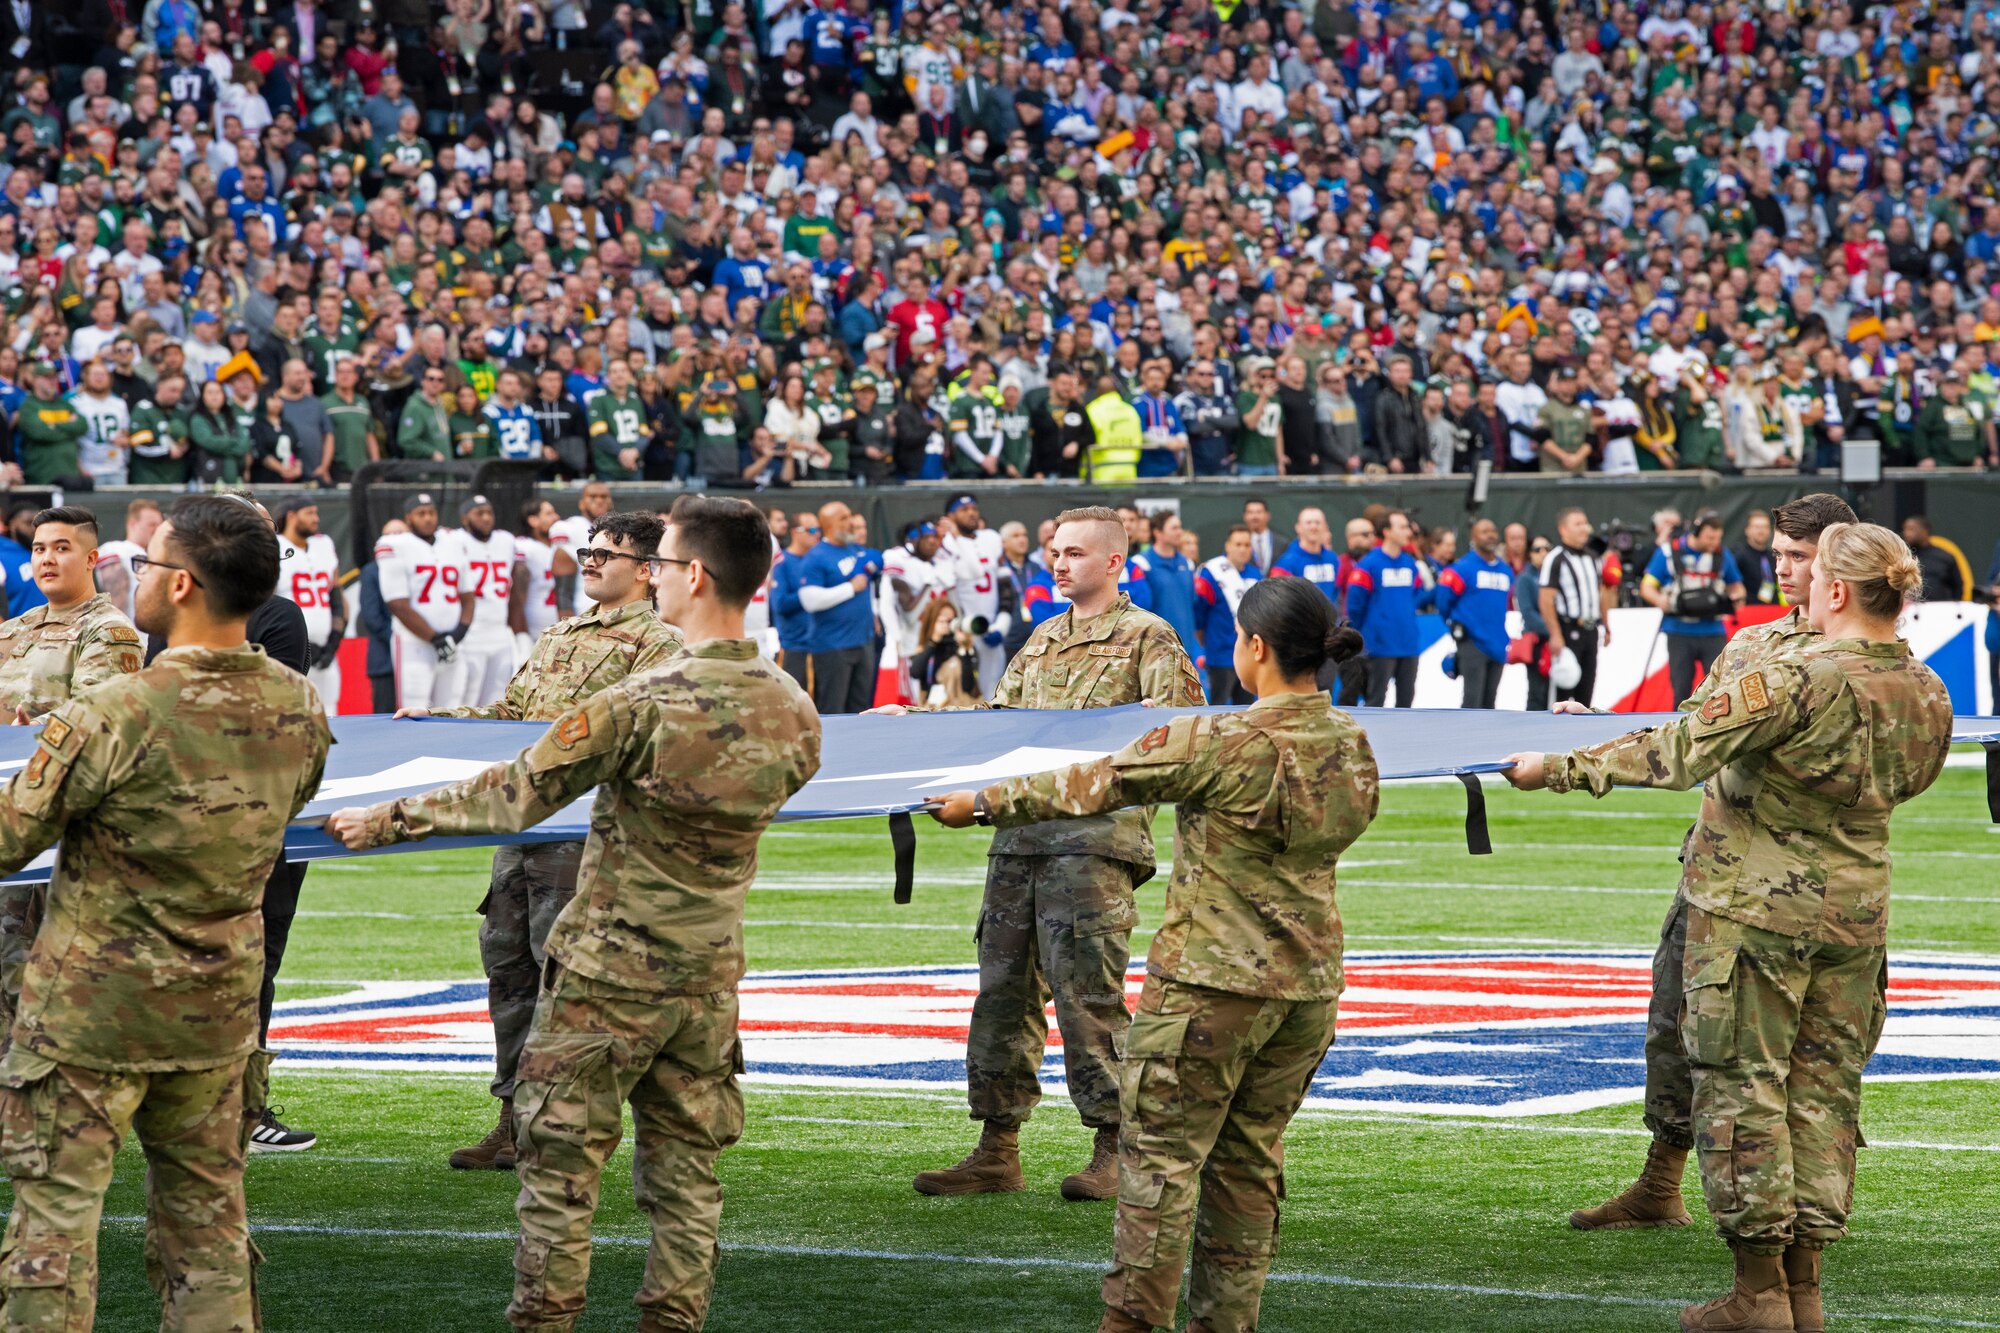 U.S. Airmen assigned to Royal Air Force Mildenhall and RAF Lakenheath hold an unfurled U.S. Flag during the pre-game ceremony of the National Football League’s New York Giants vs. Green Bay Packers game at Tottenham Hotspur Stadium, in London, England, Oct. 9, 2022. As part of the pre-game ceremony, Airmen presented a U.S. Flag alongside a U.K. flag presented by British service members. The Giants defeated the Packers 27-22. (U.S. Air Force photo by Tech. Sgt. Anthony Hetlage)